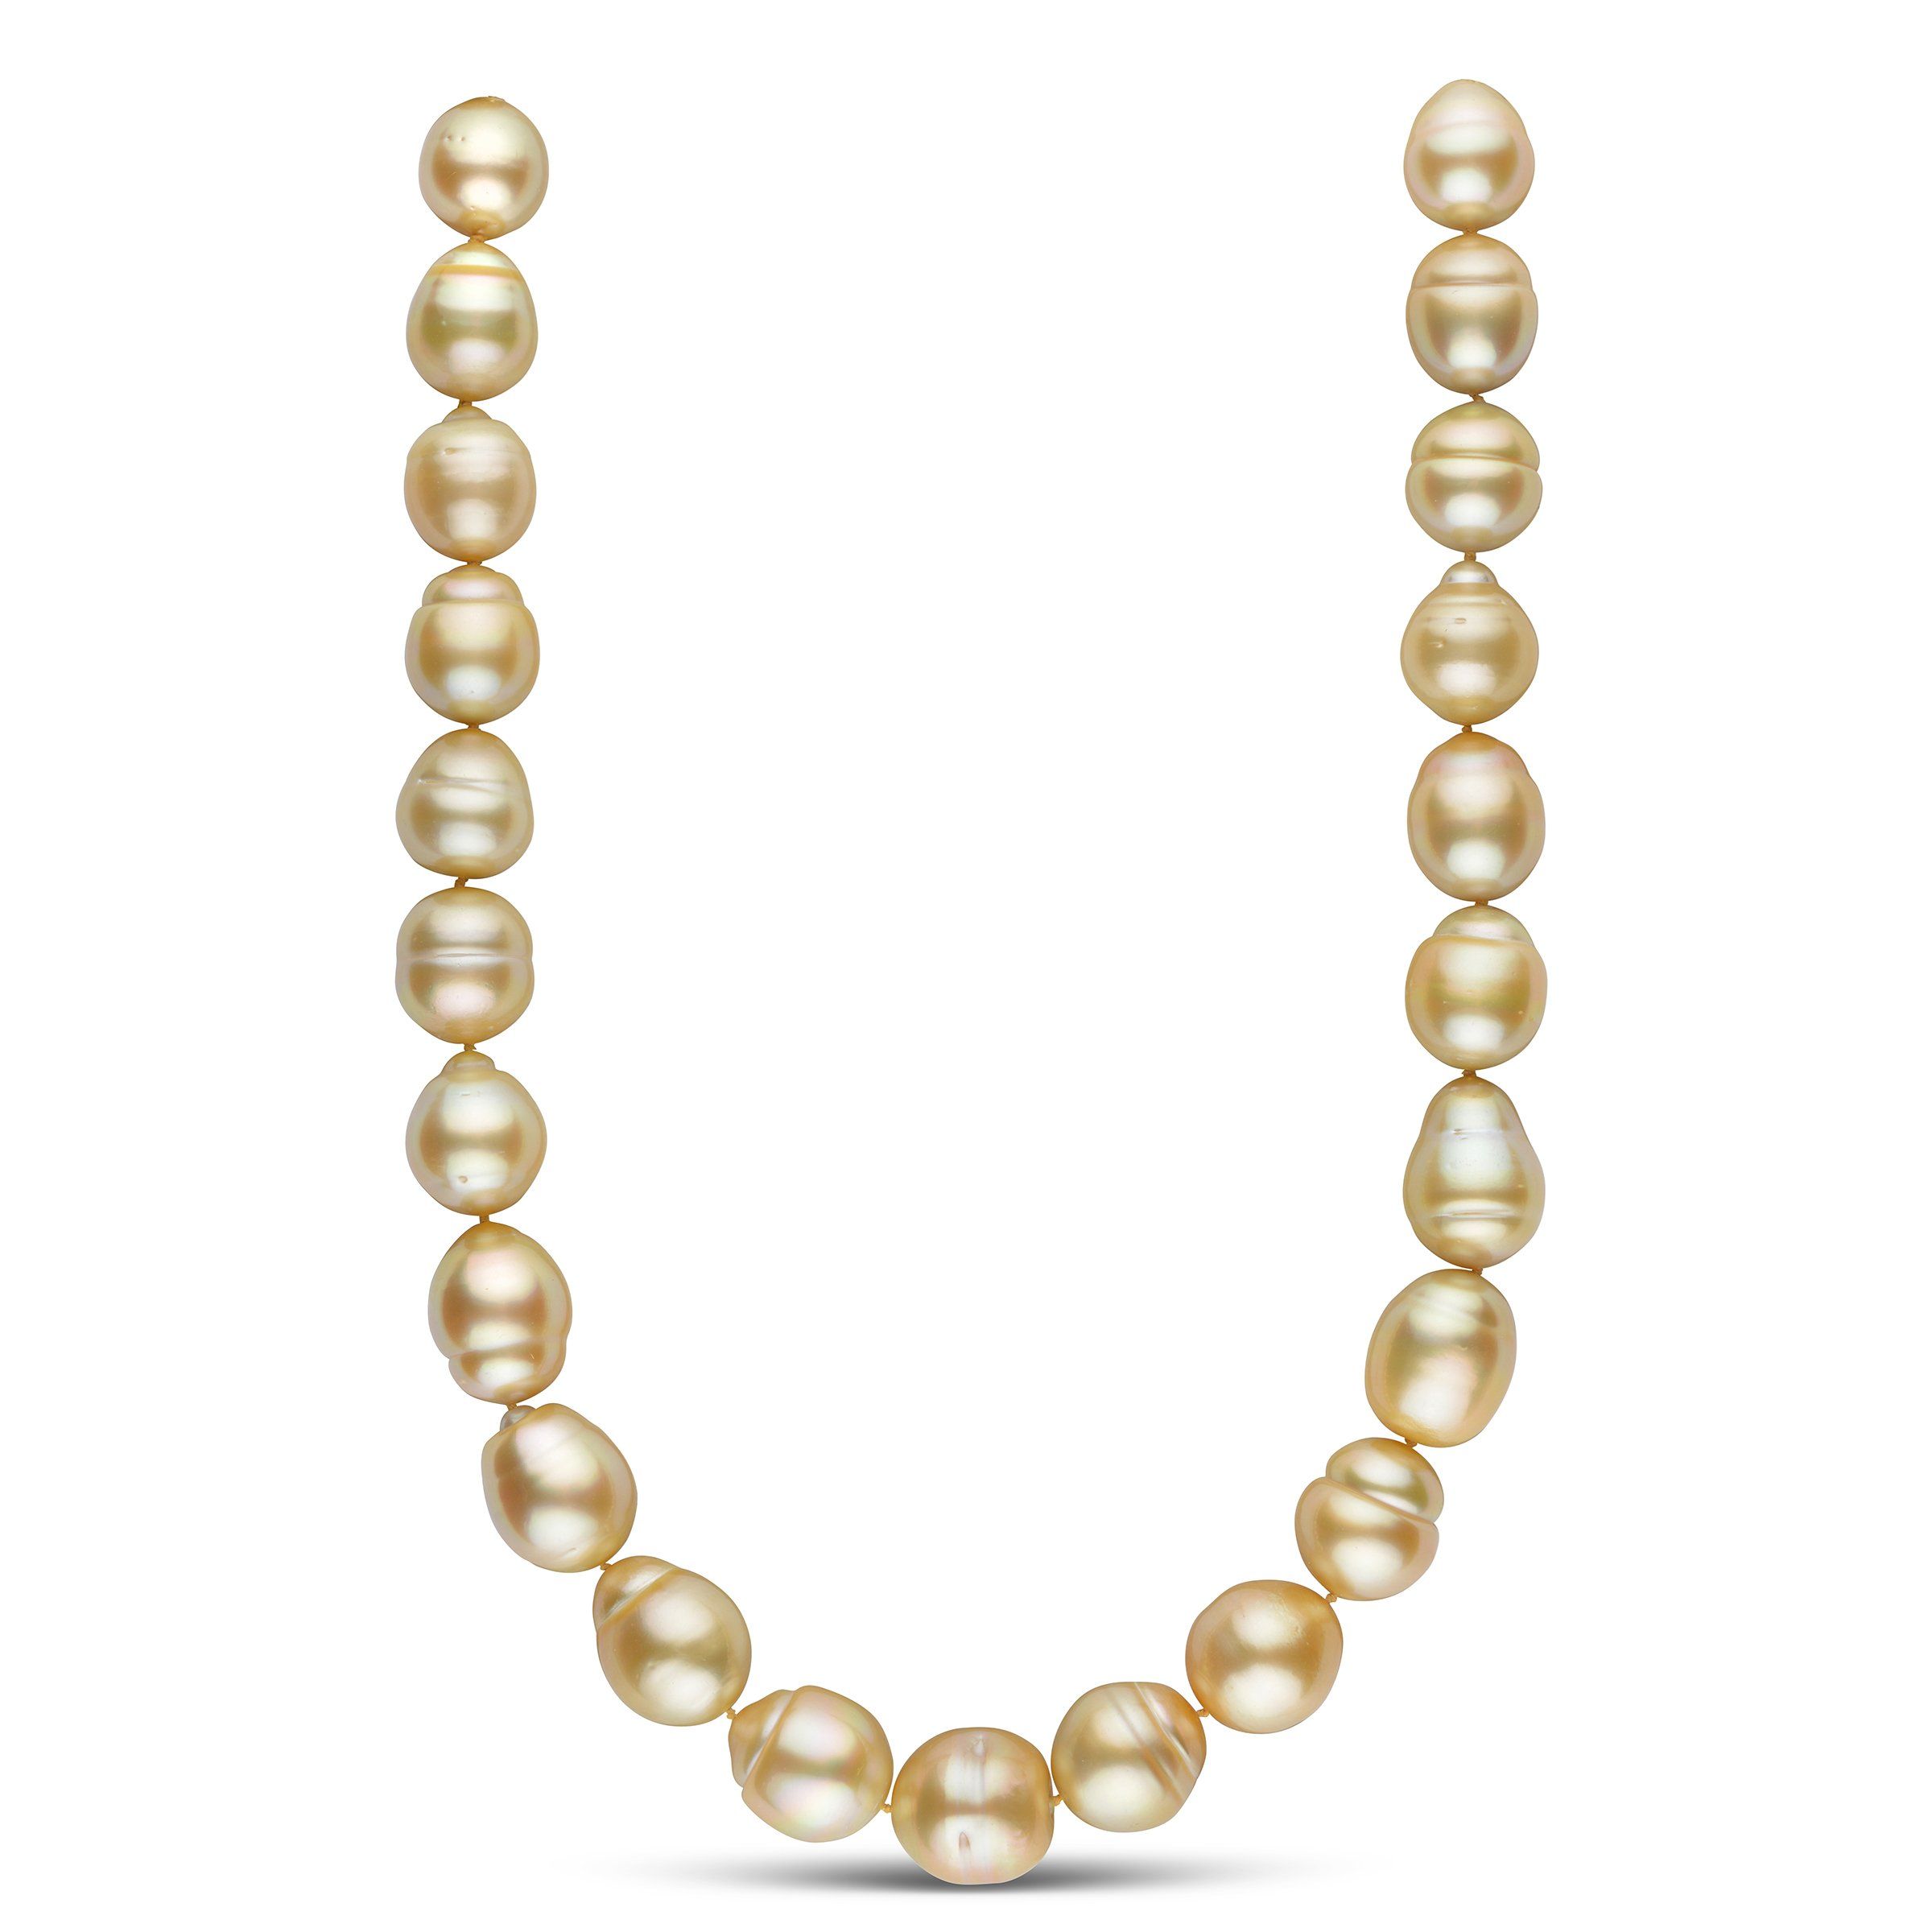 18 inch 15.0-17.2 mm AA+/AAA Golden South Sea Baroque Pearl Necklace